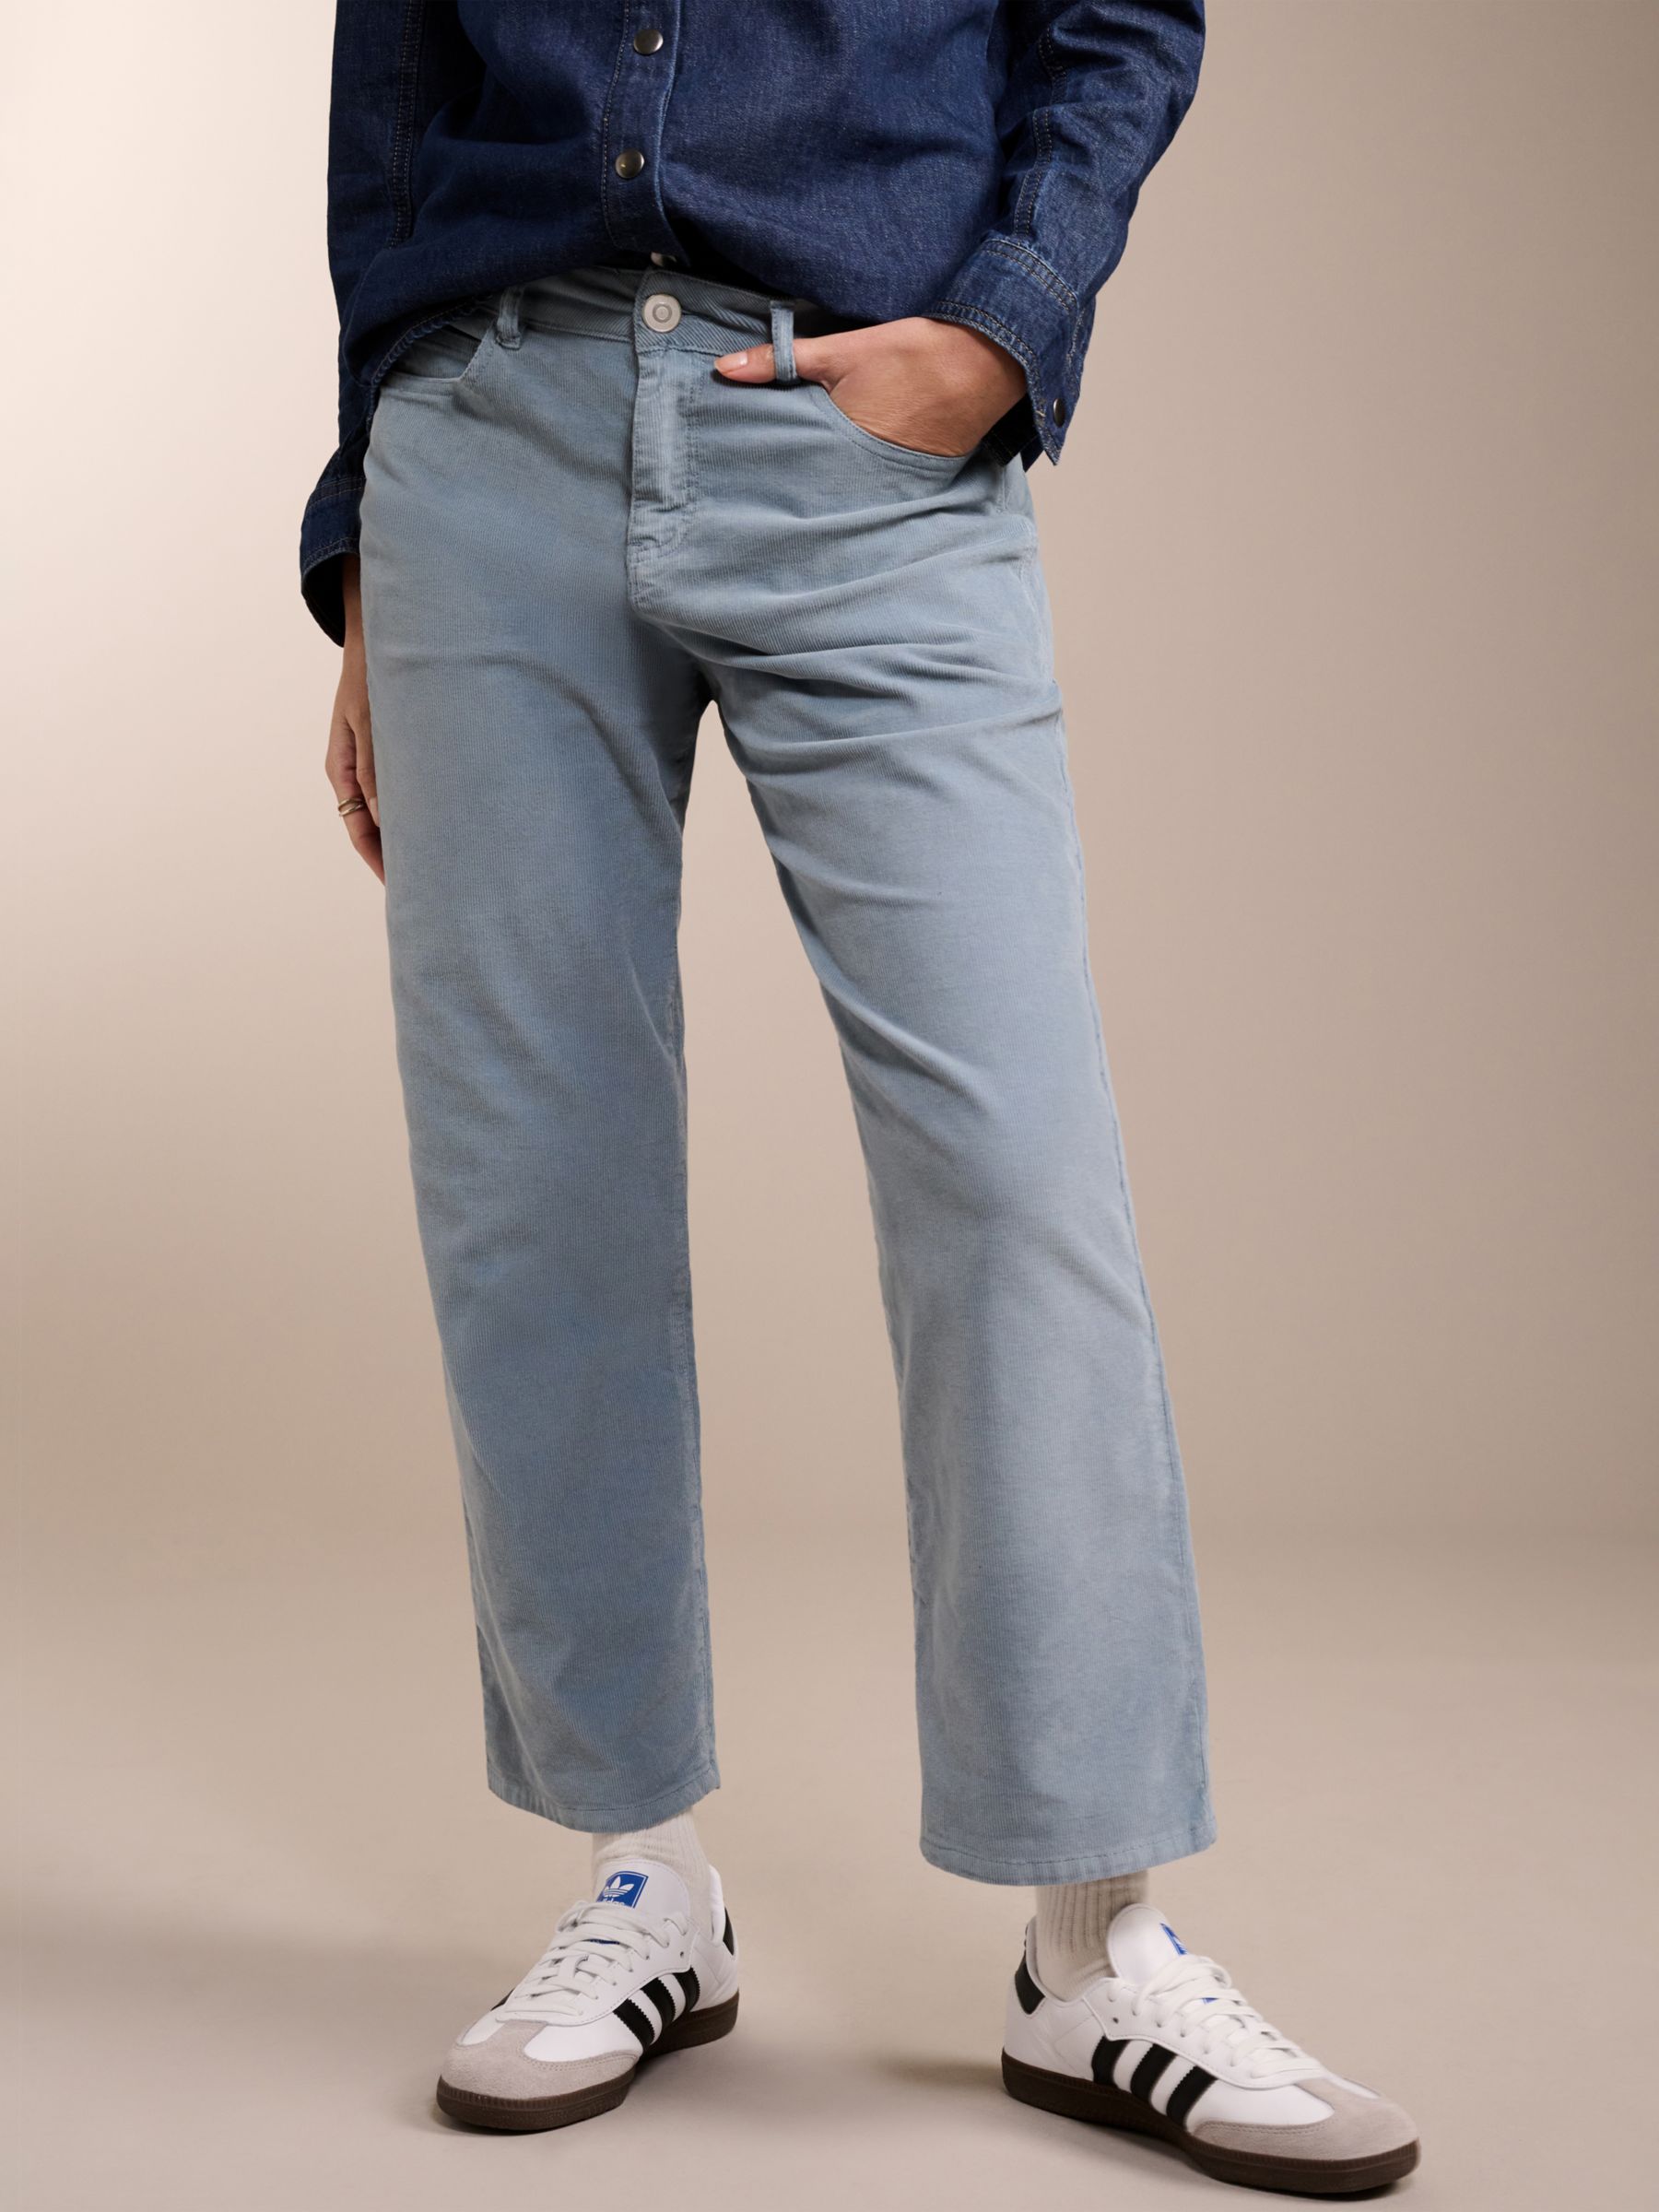 Corduroy Trousers - Teal